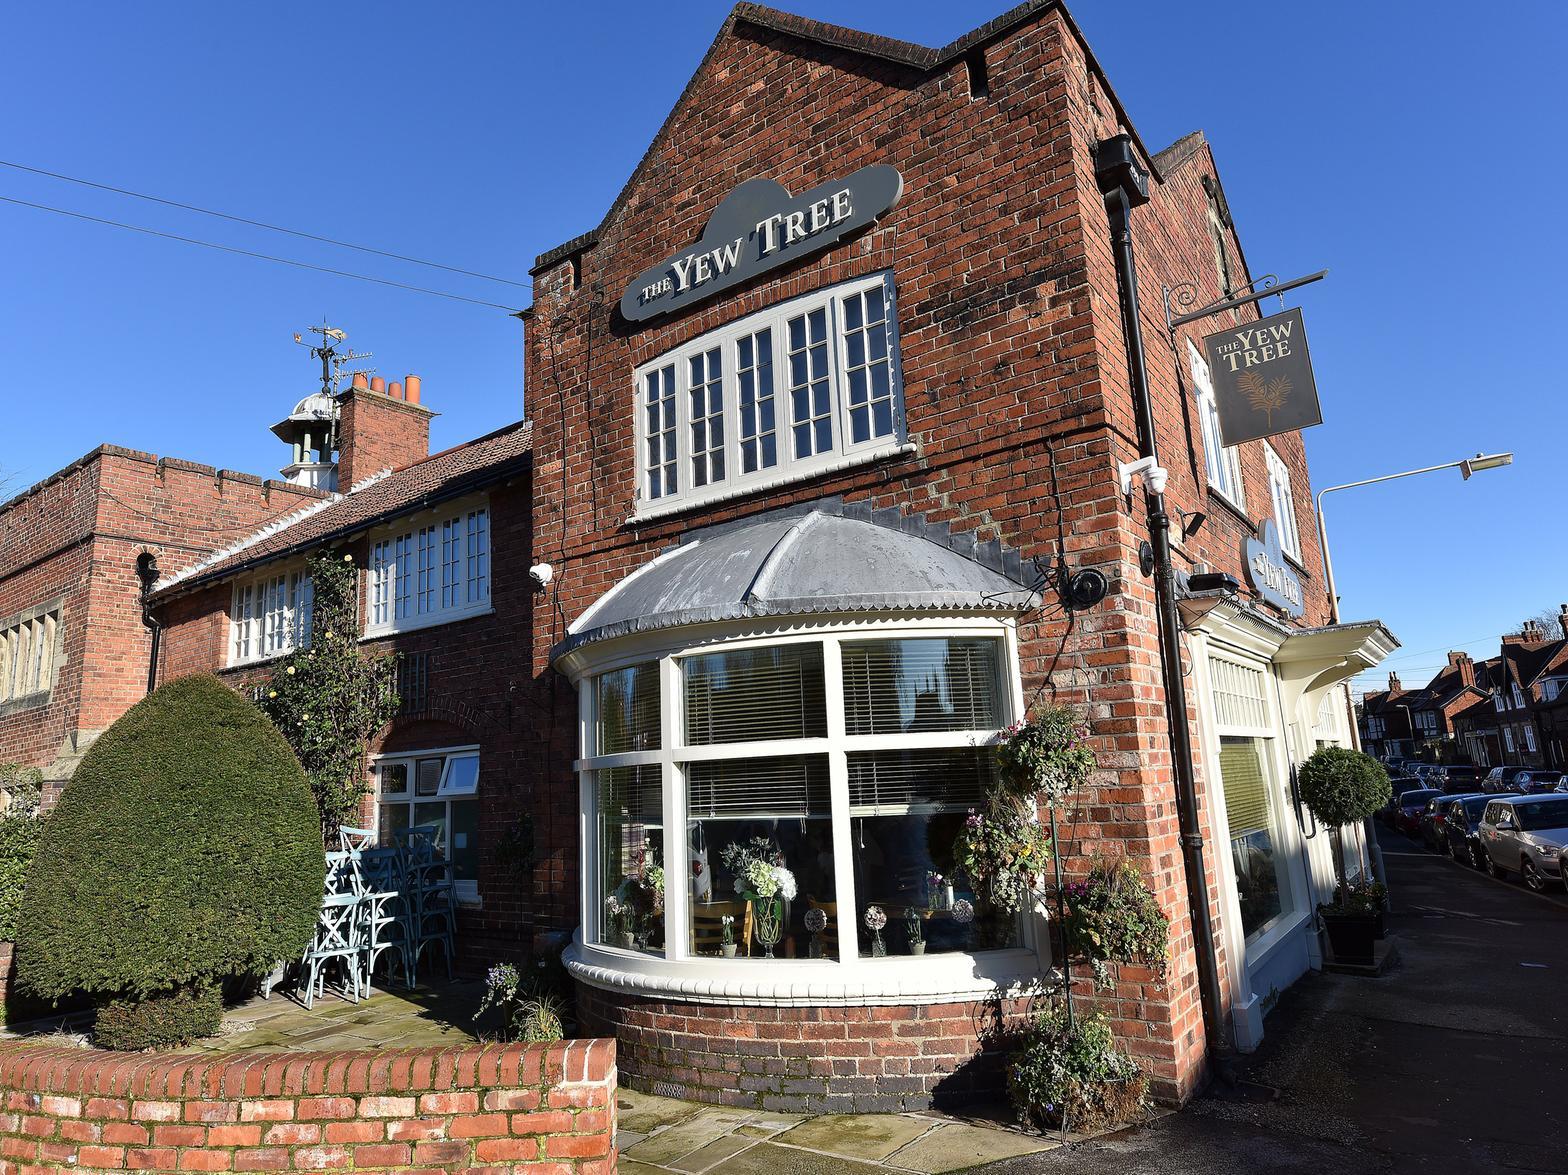 A reviewer said: We came across this tearoom while walking around Scalby, its very quaint and has a good menu and great atmosphere. Would definitely visit again. Staff very friendly and helpful.